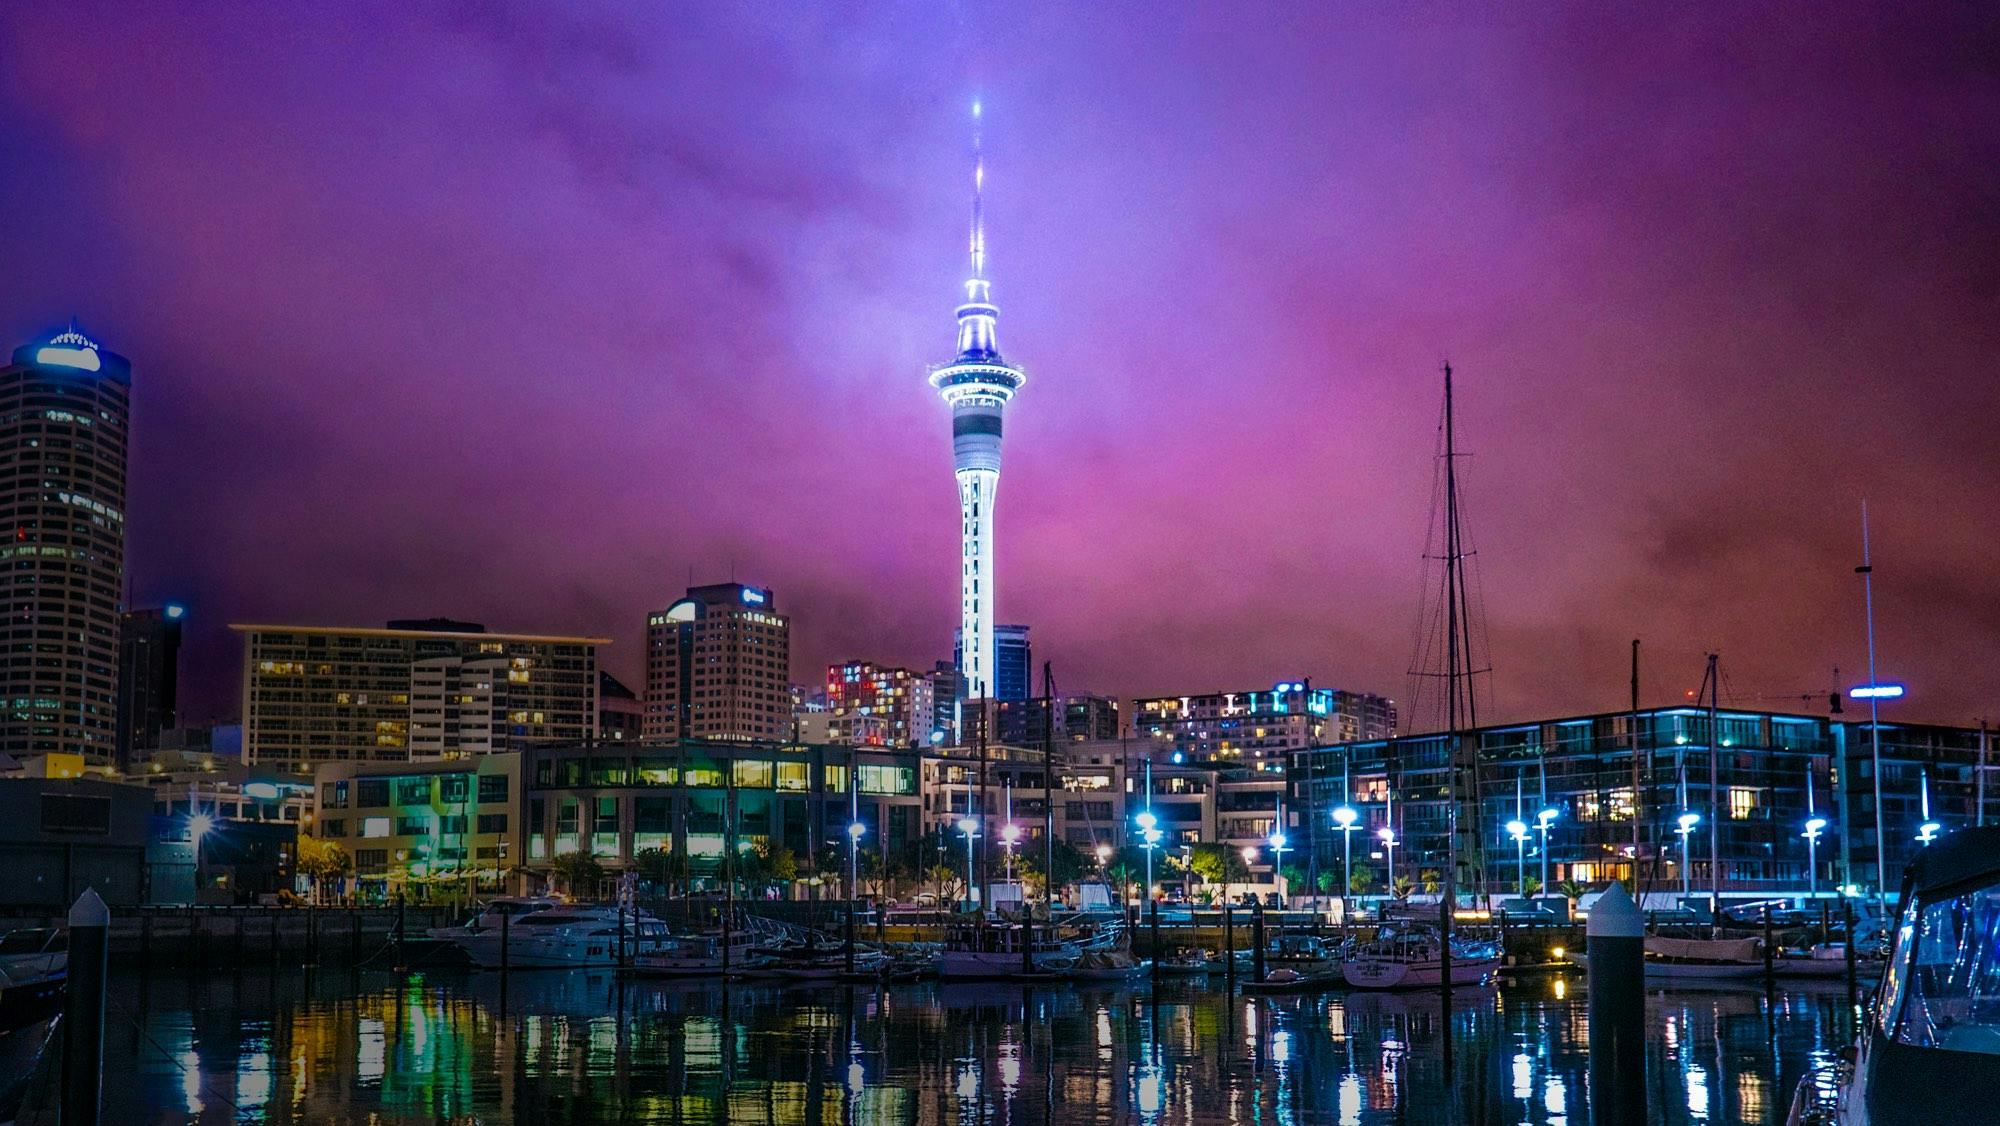 auckland at night